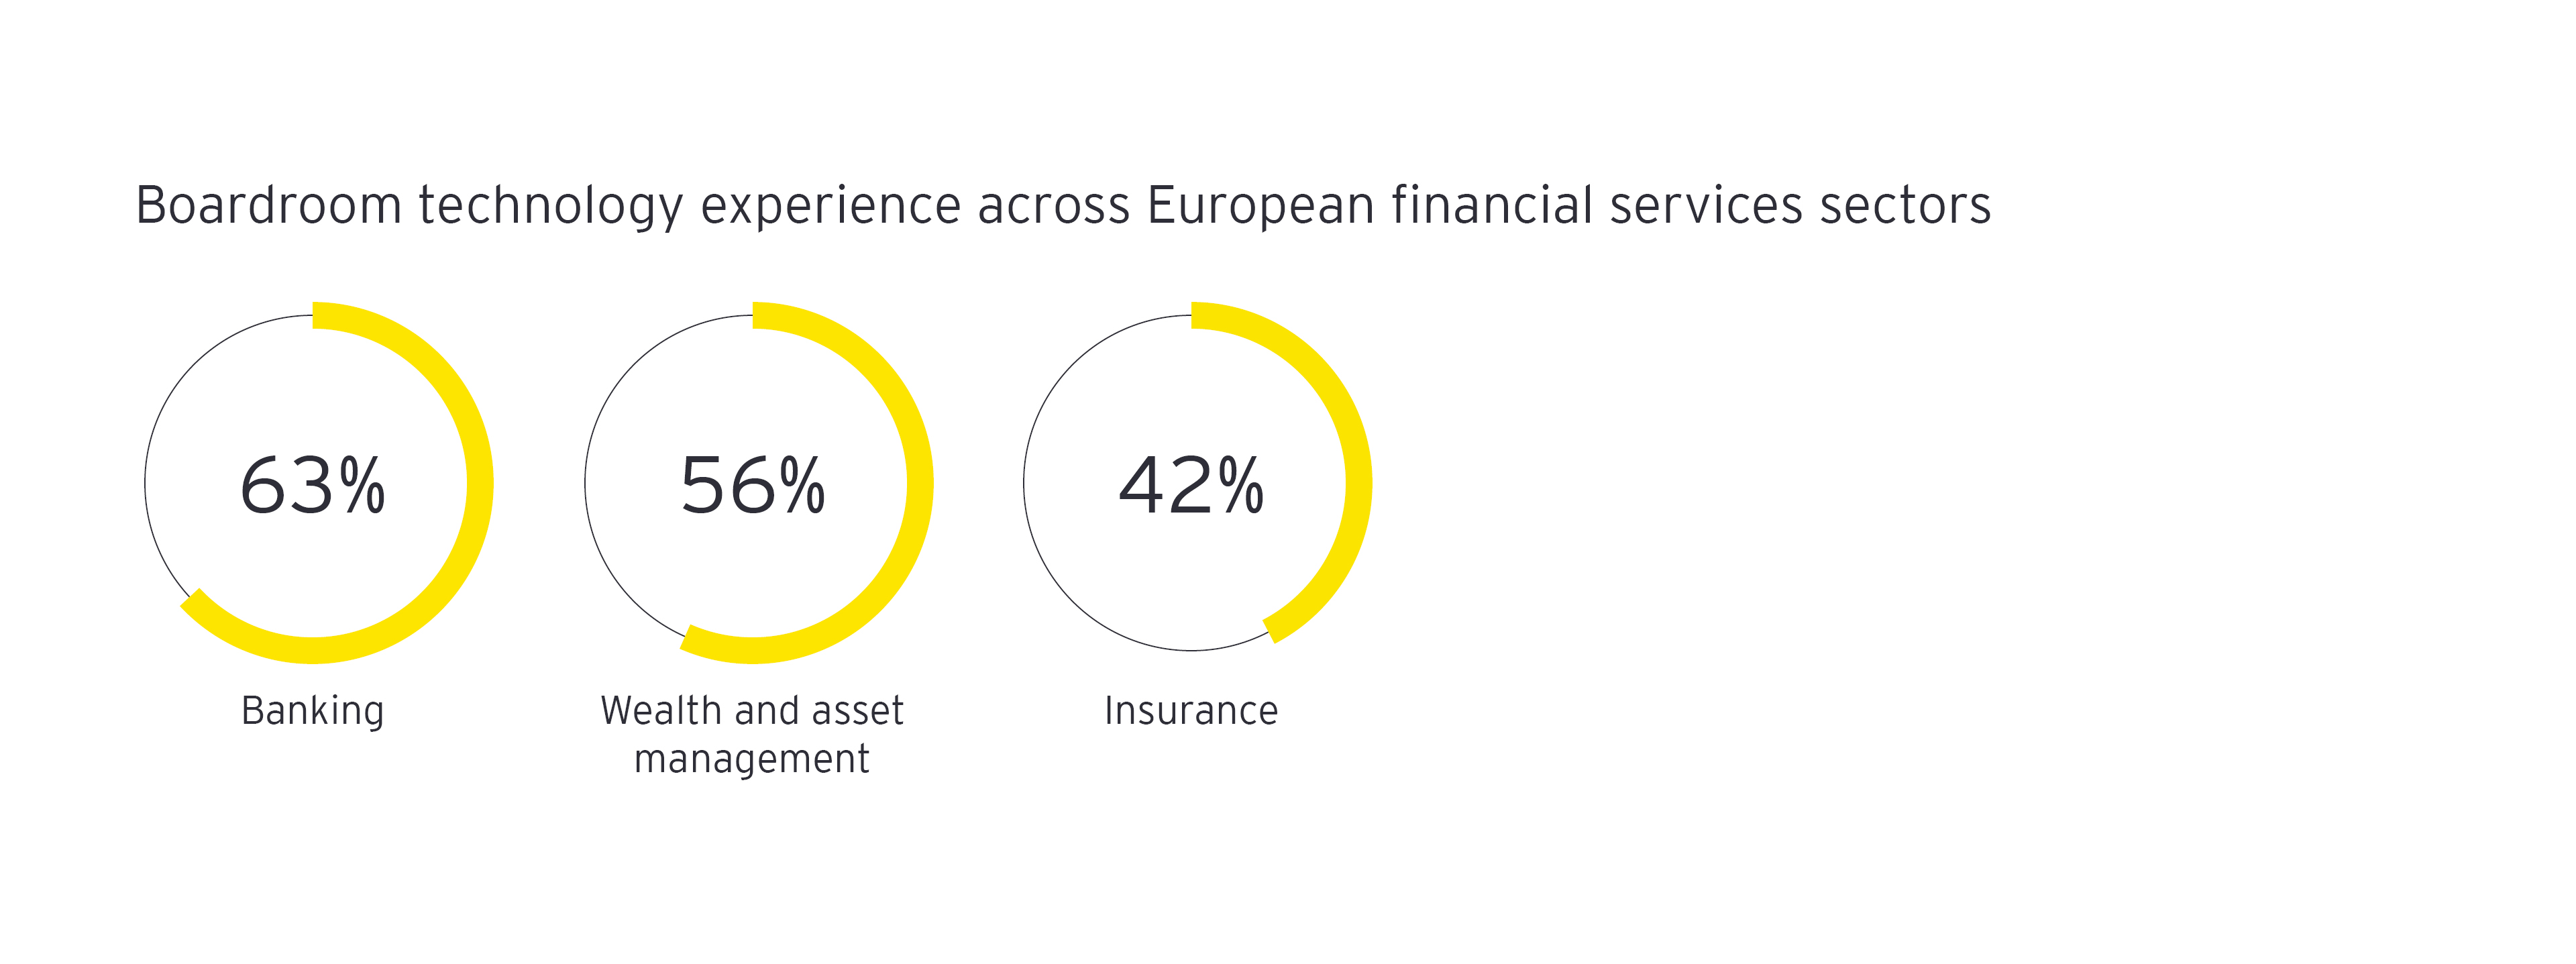 Boardroom technology experience across European financial services sector